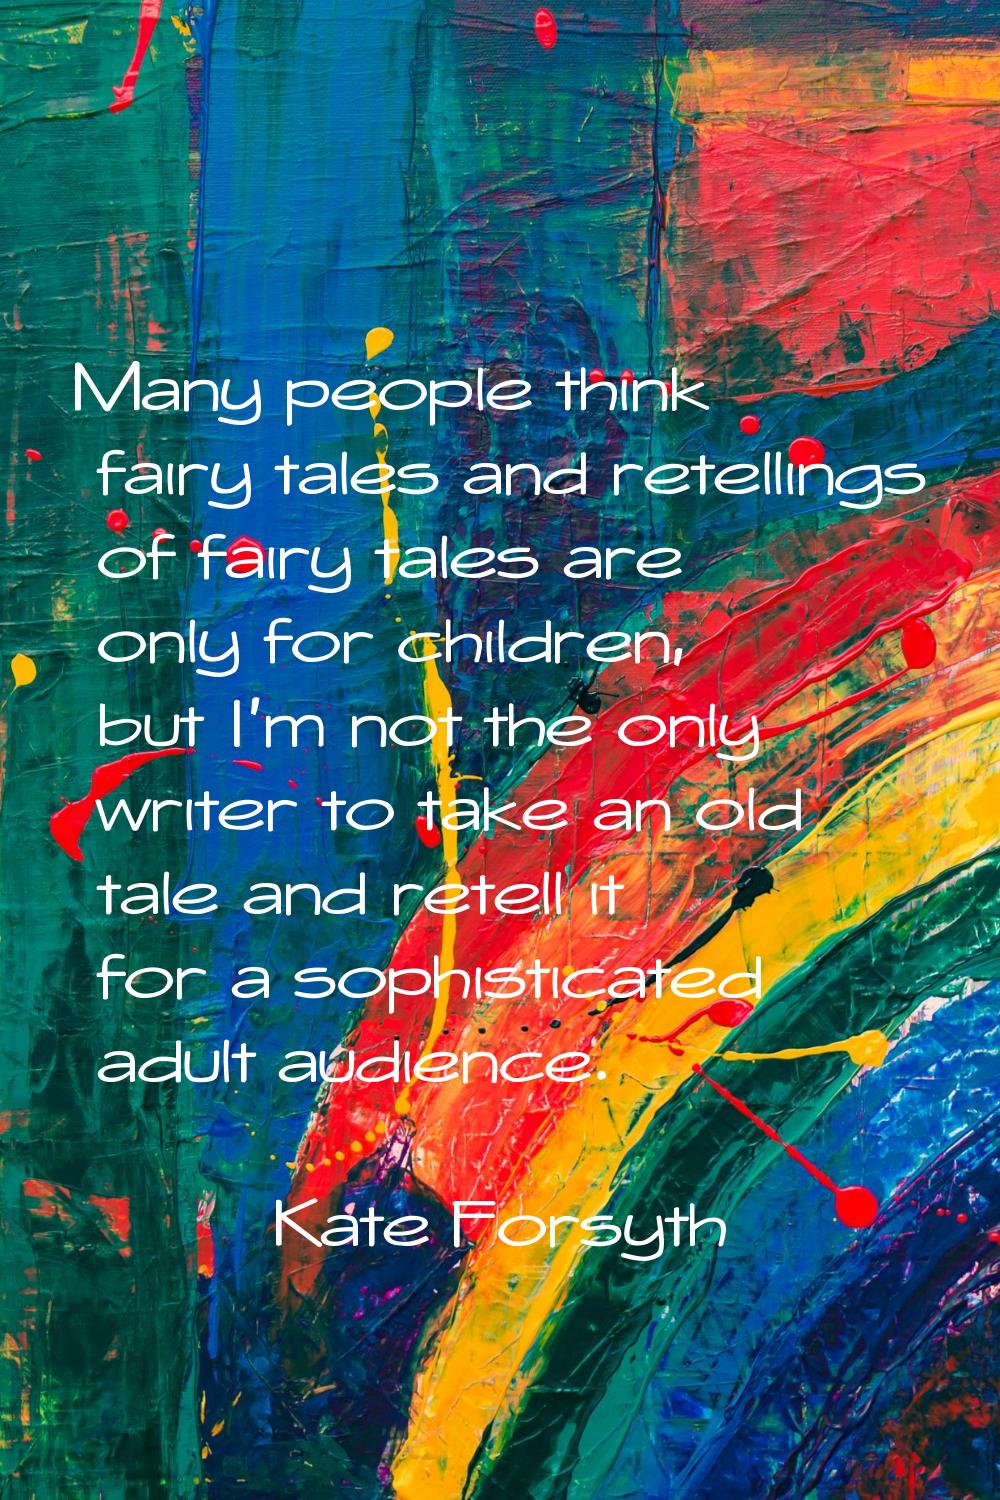 Many people think fairy tales and retellings of fairy tales are only for children, but I'm not the 